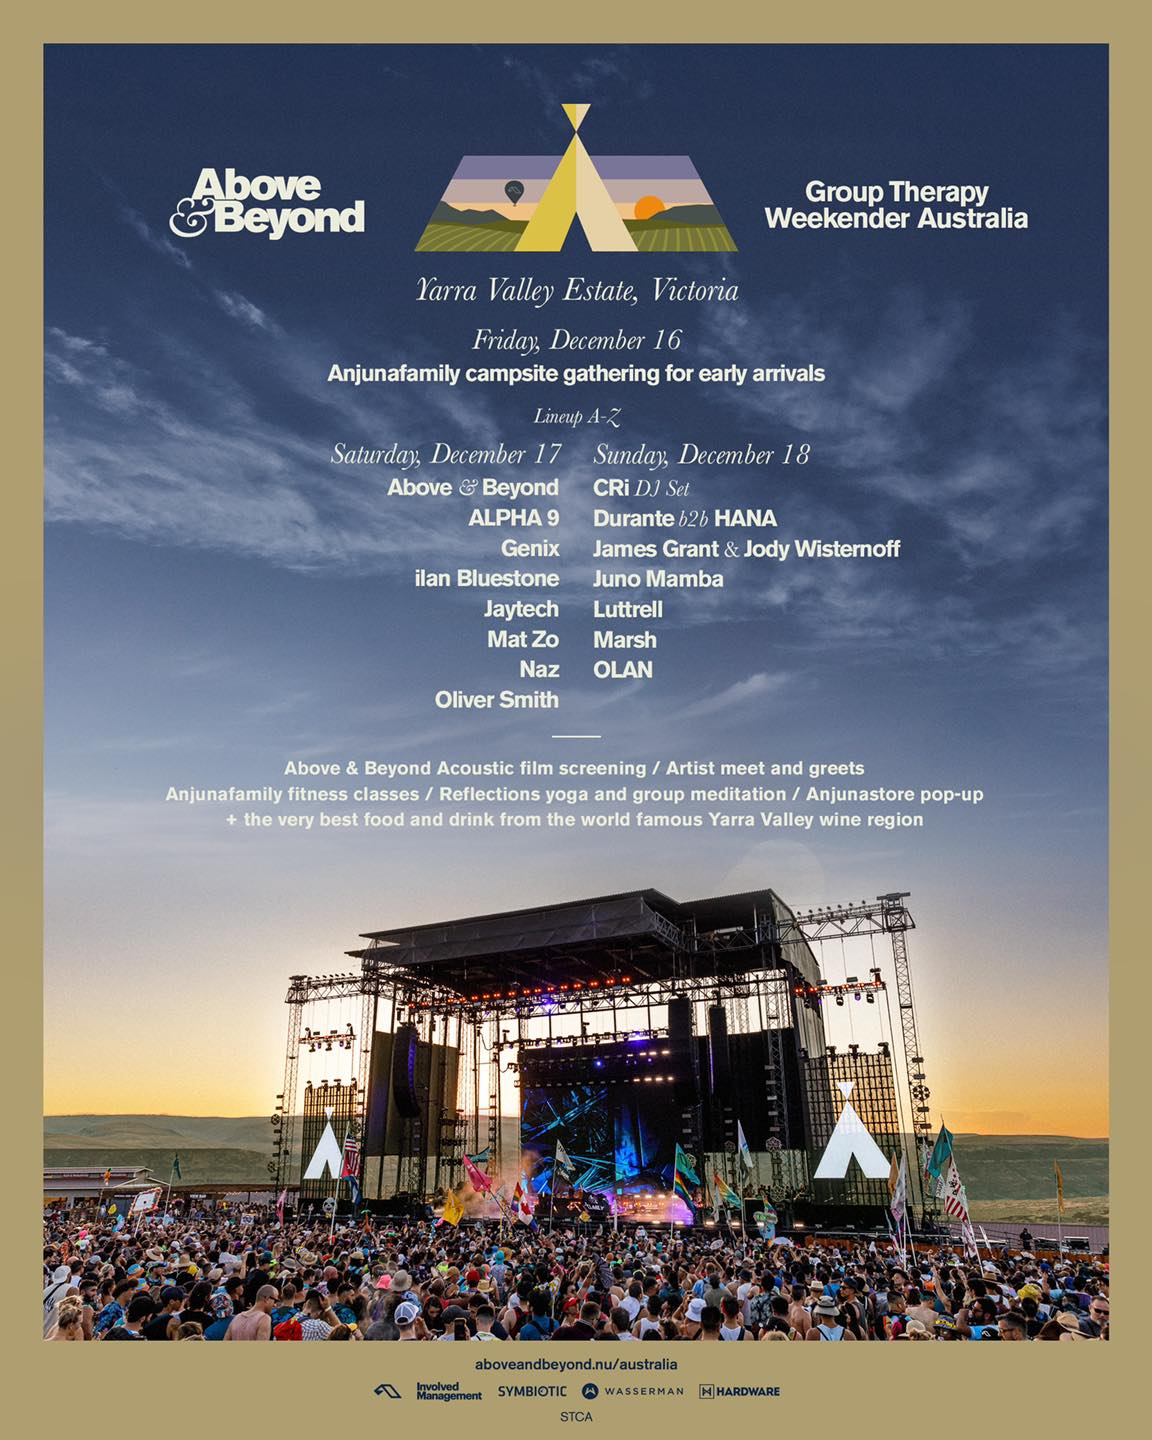 above-and-beyond-group-therapy-weekender-australia-2022-poster-oz-edm